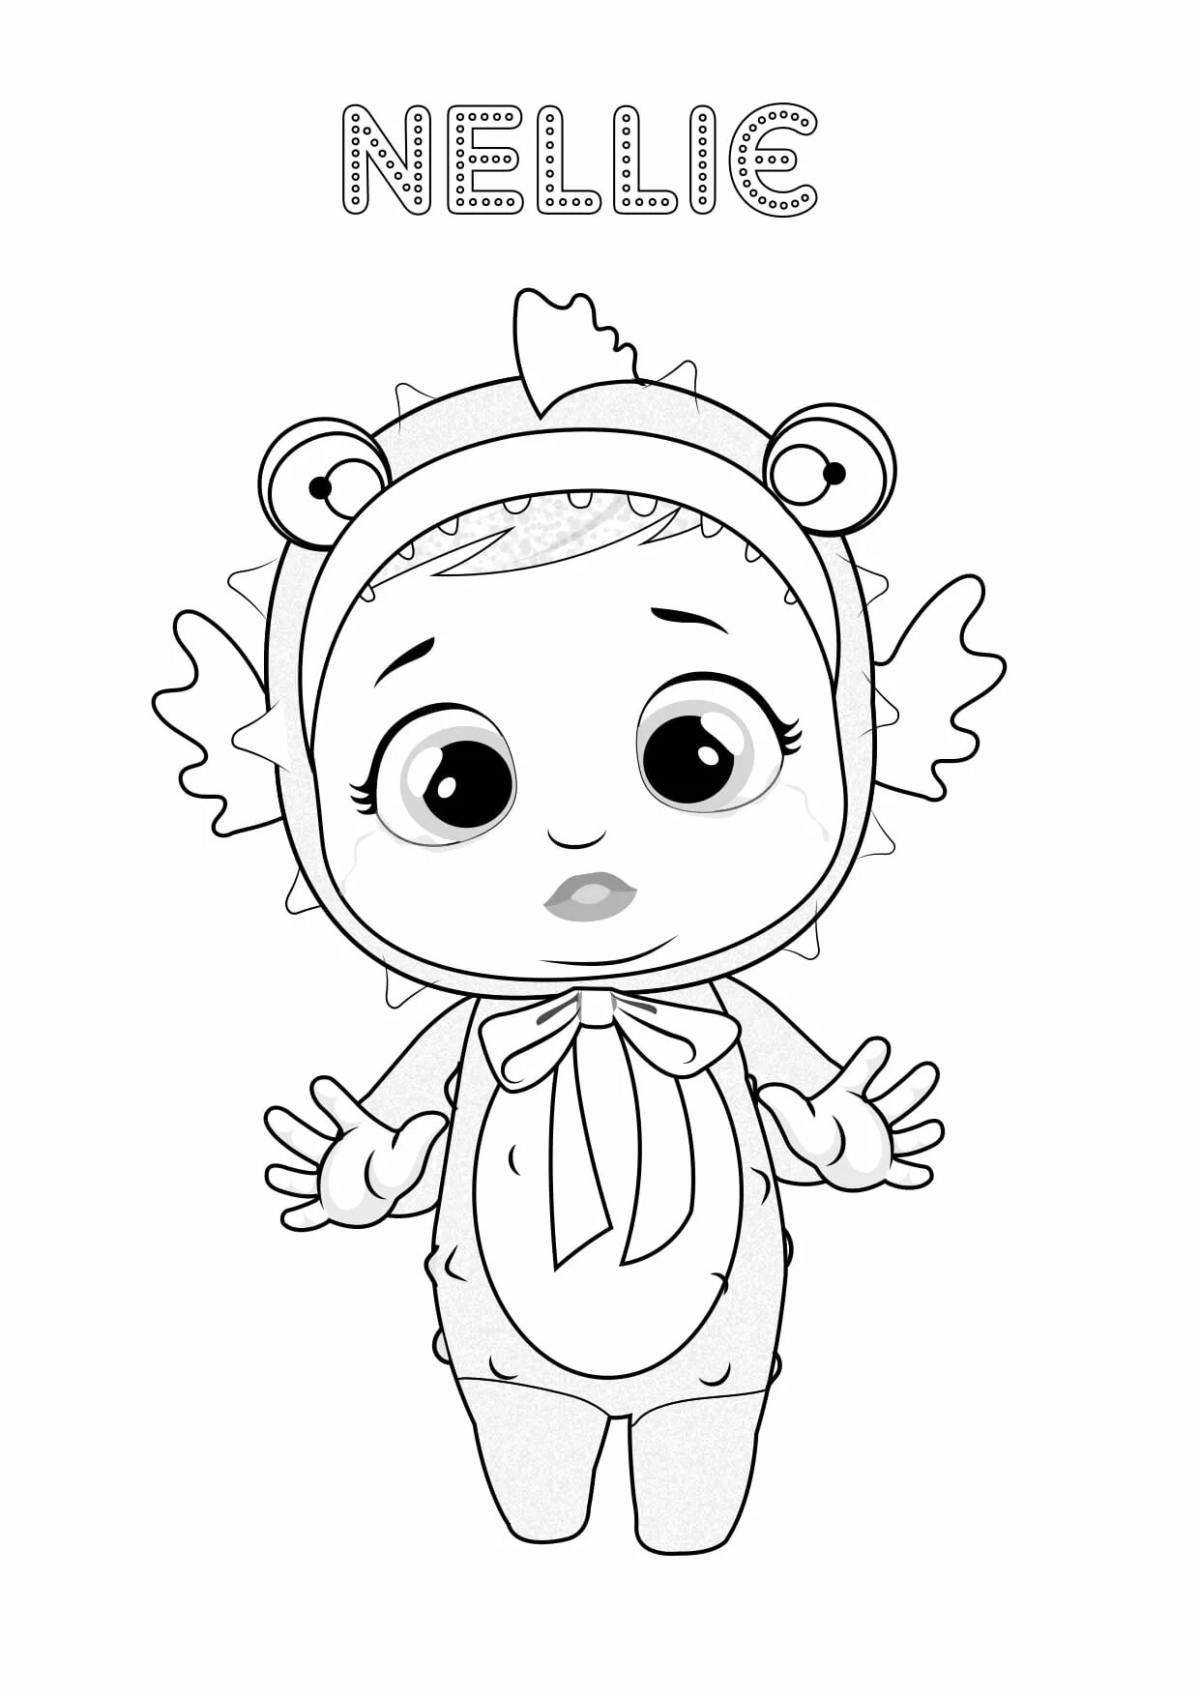 Kreis baby coloring page